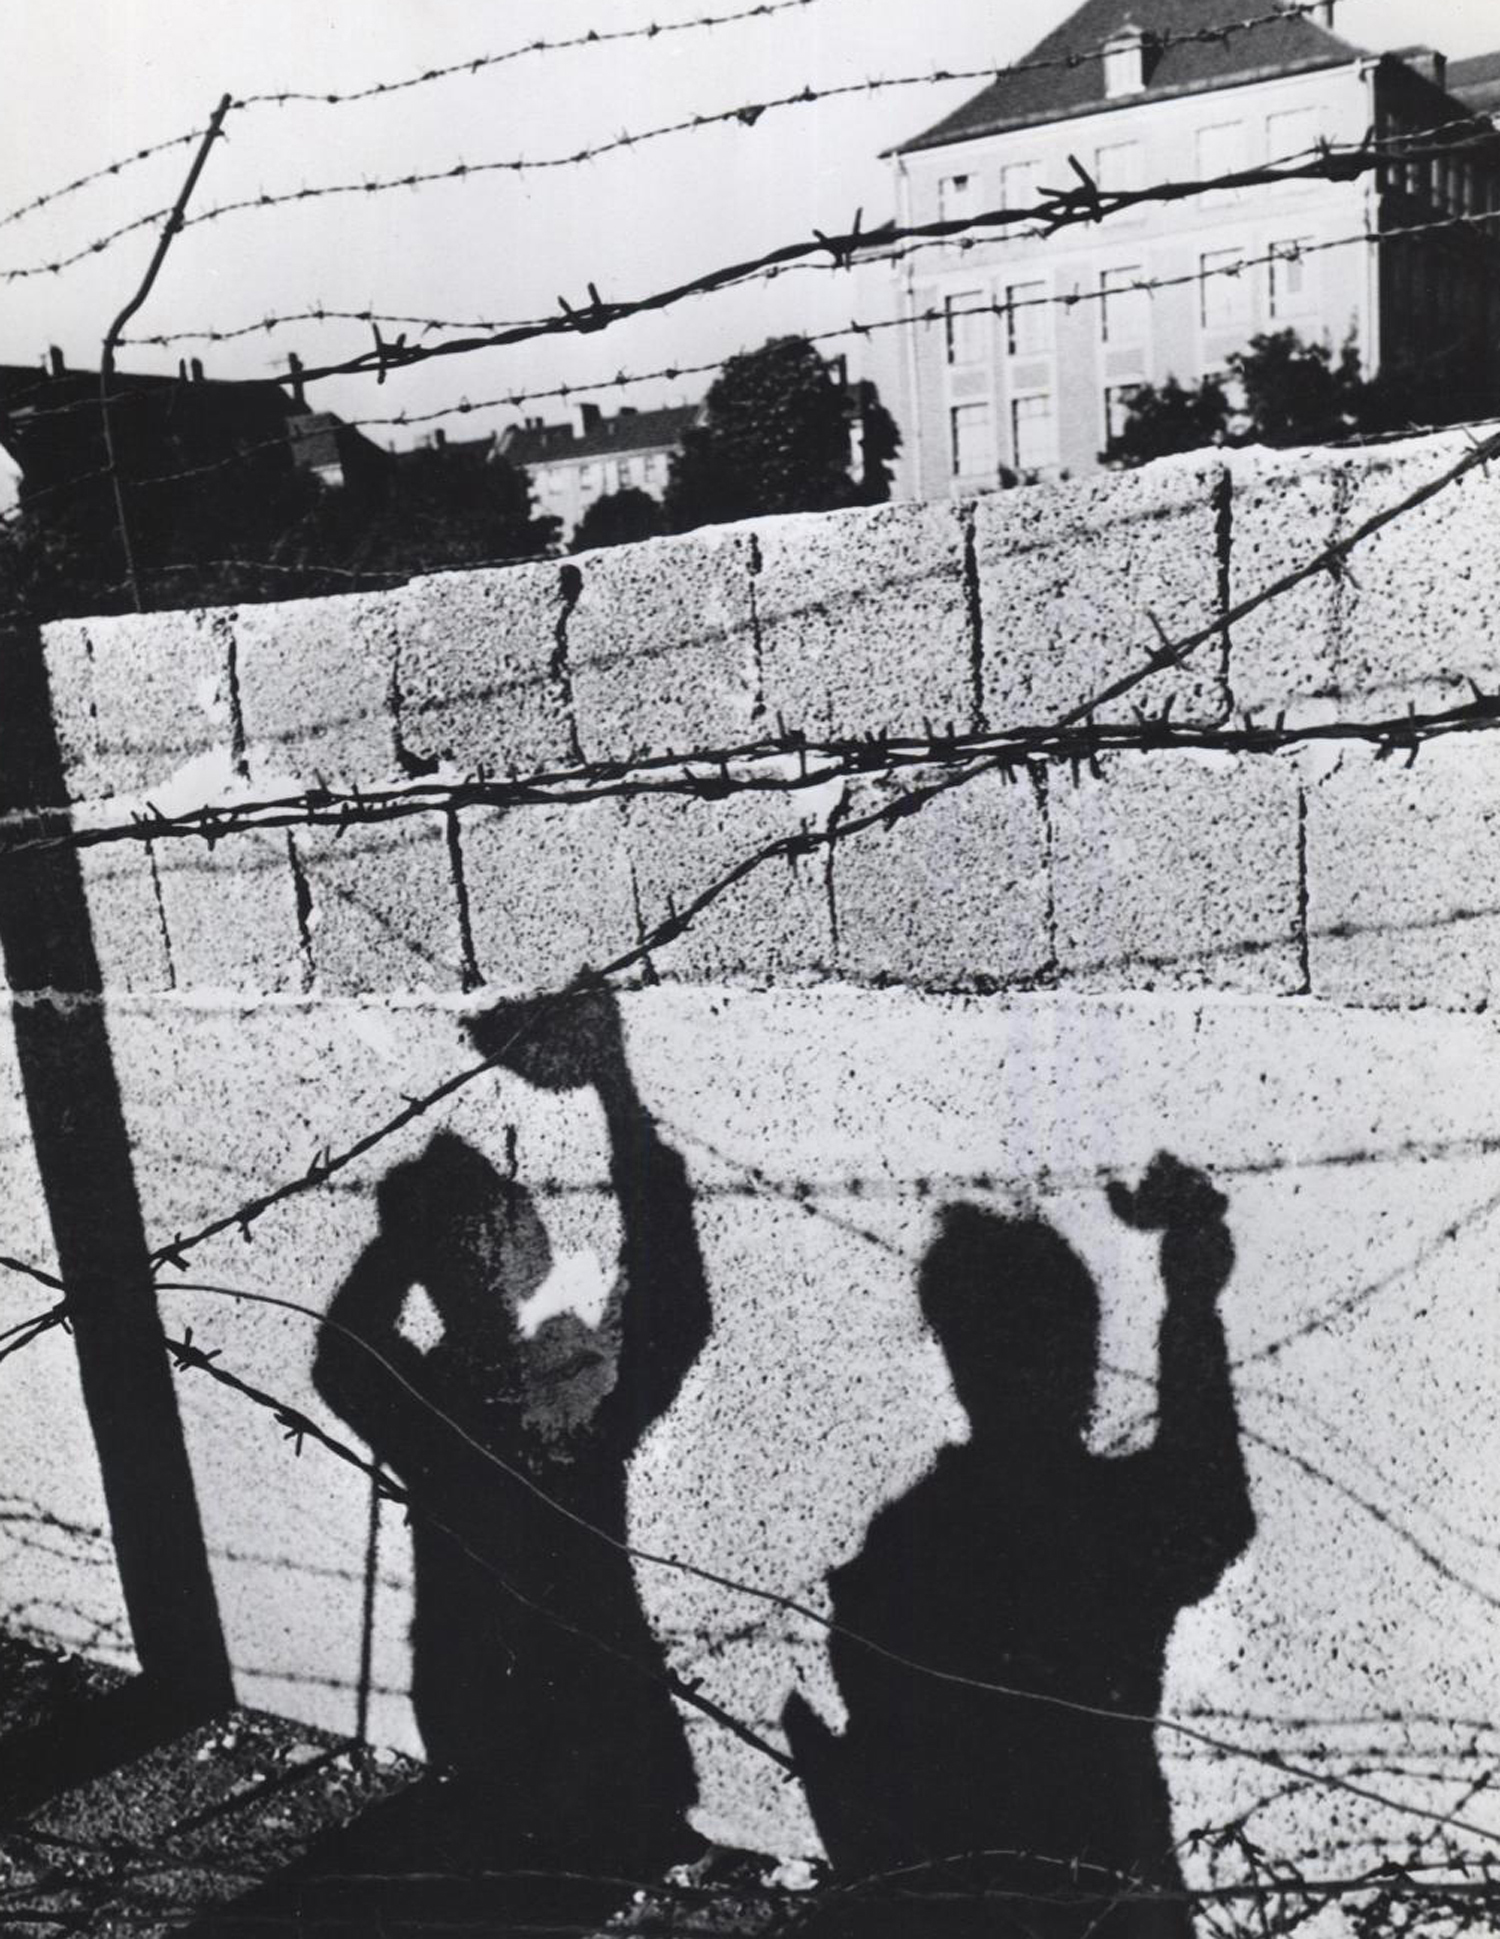 A picture is worth a thousand words: In October 1961, the shadows of two West Berliners waving to friends across the East-West border fall symbolically upon the concrete of the newly-built wall in a frame of barbed wire. Photo: U.S. Information Agency.